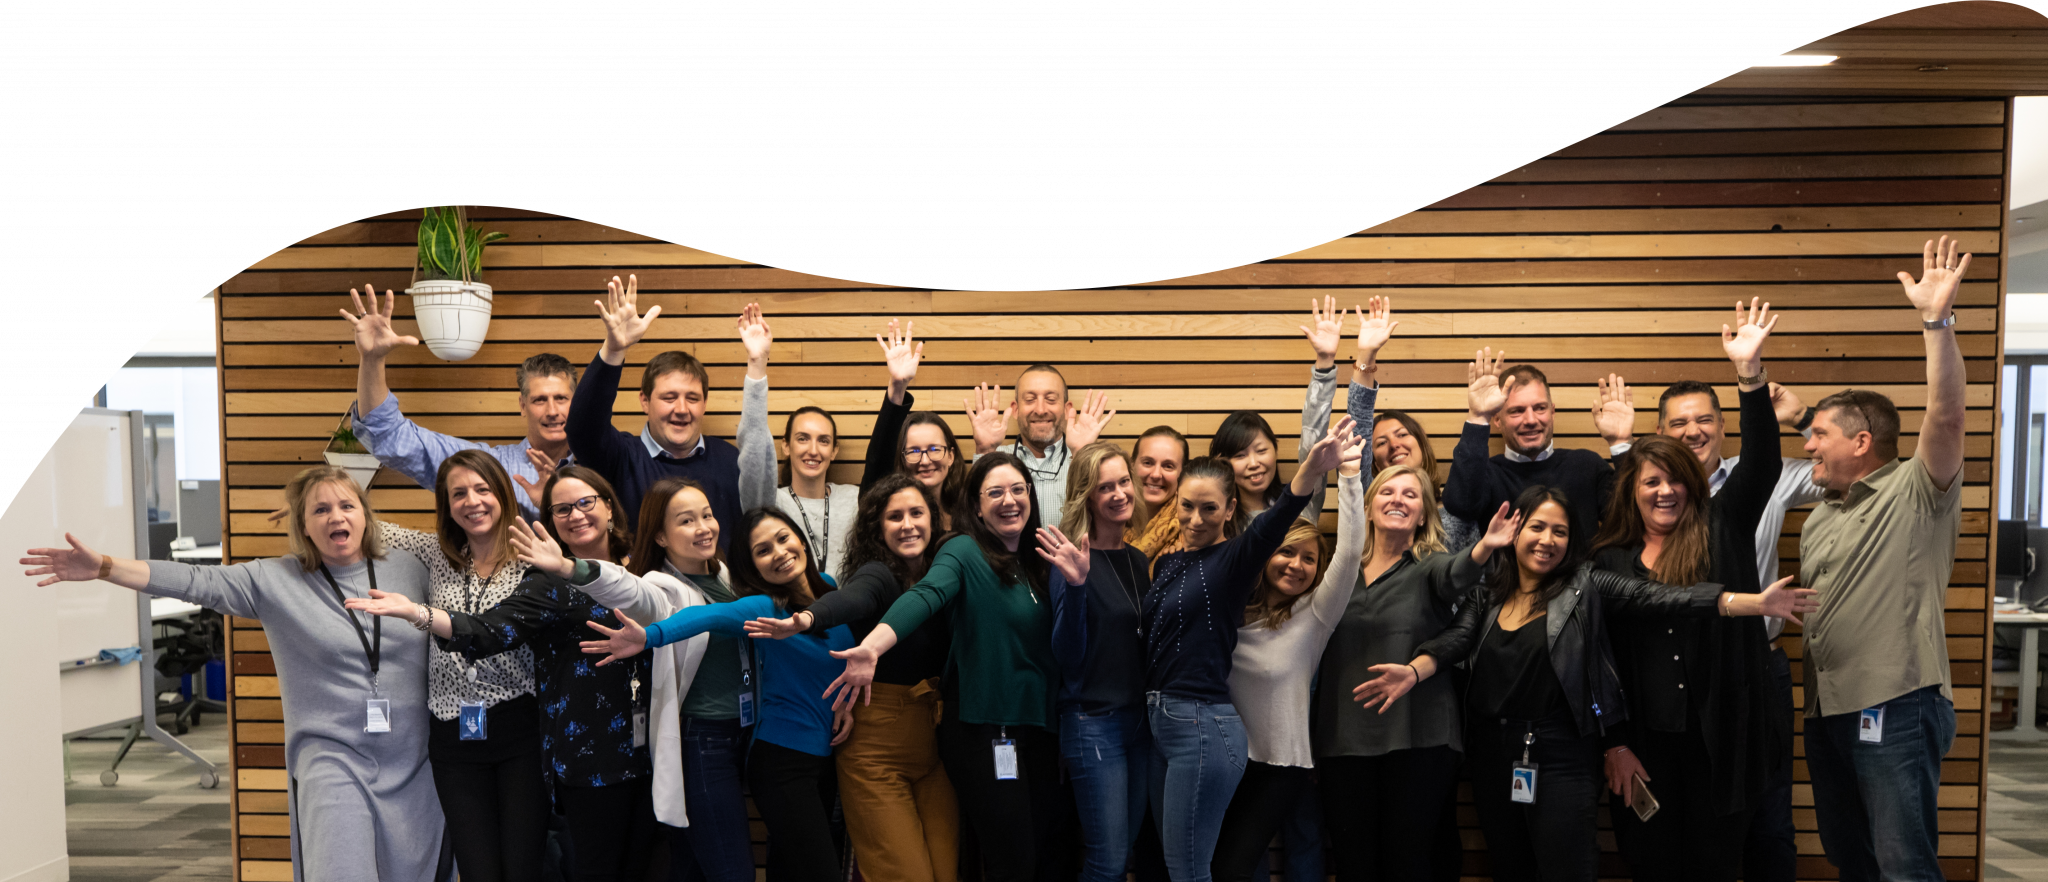 Group of employees standing together with their arms in the air